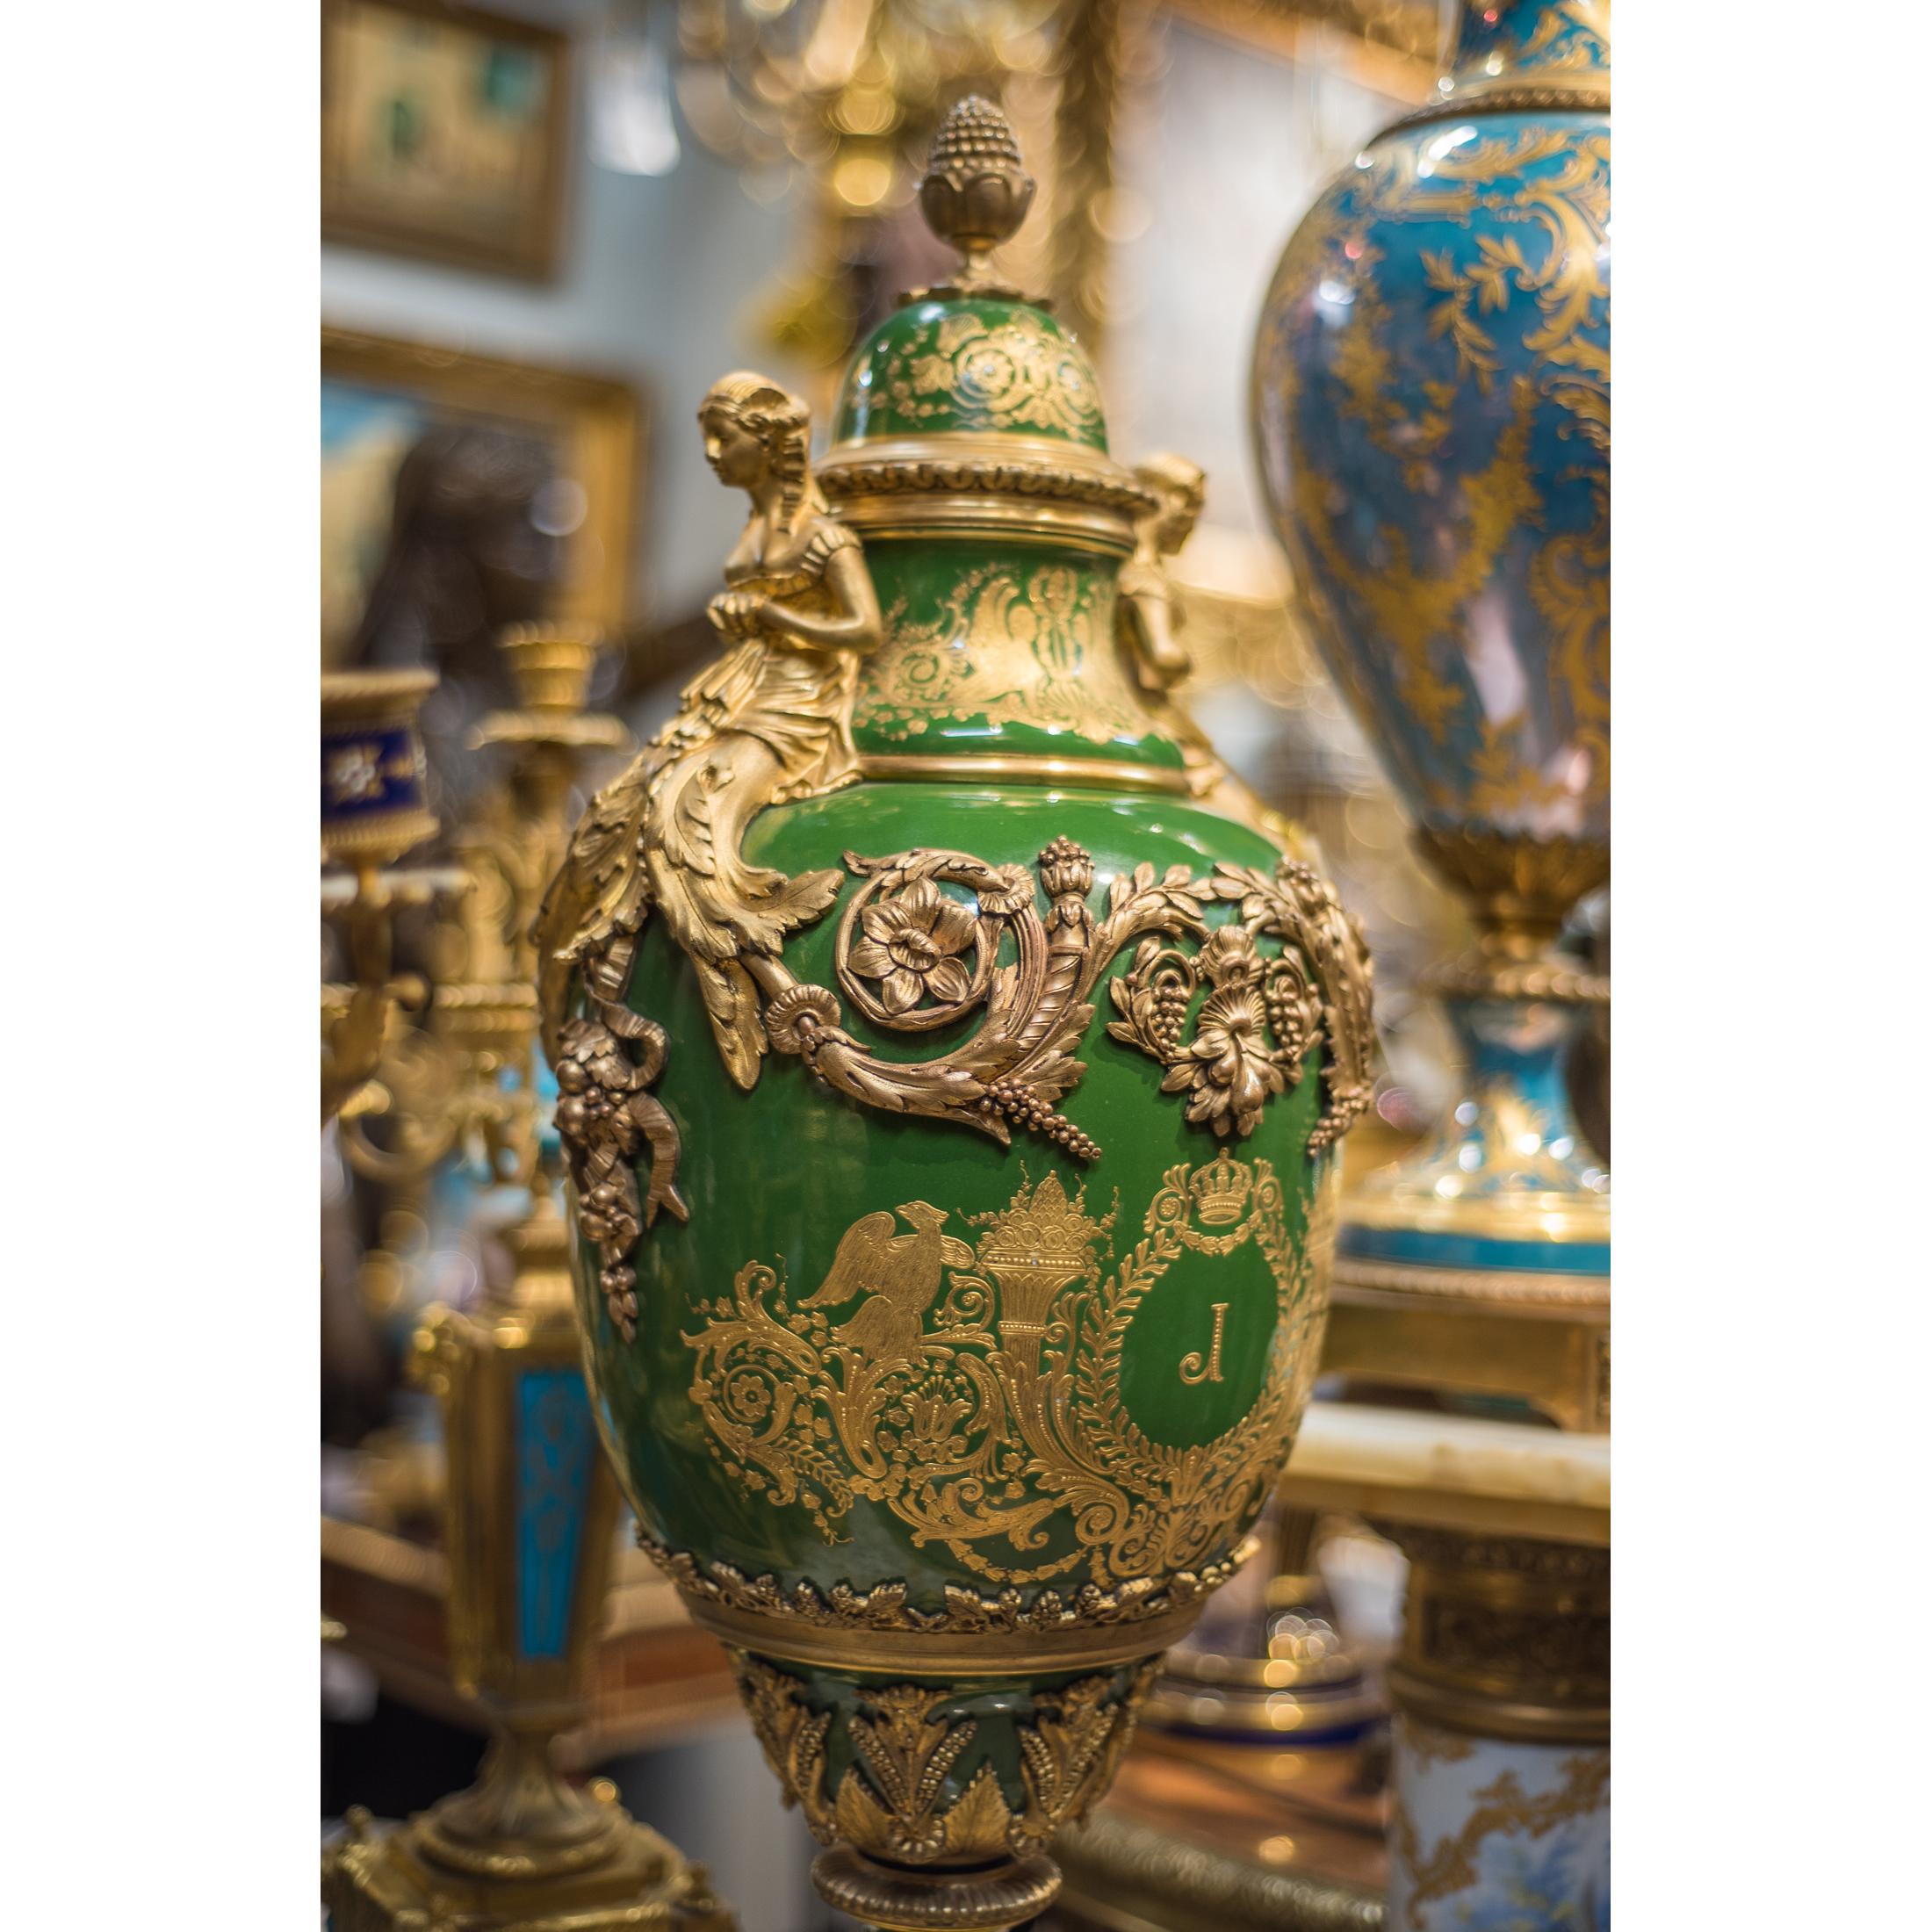 A fine quality pair of Sèvres style porcelain urns and cover. Each green with gilded highlights, domed top over baluster-form base decorated with an 